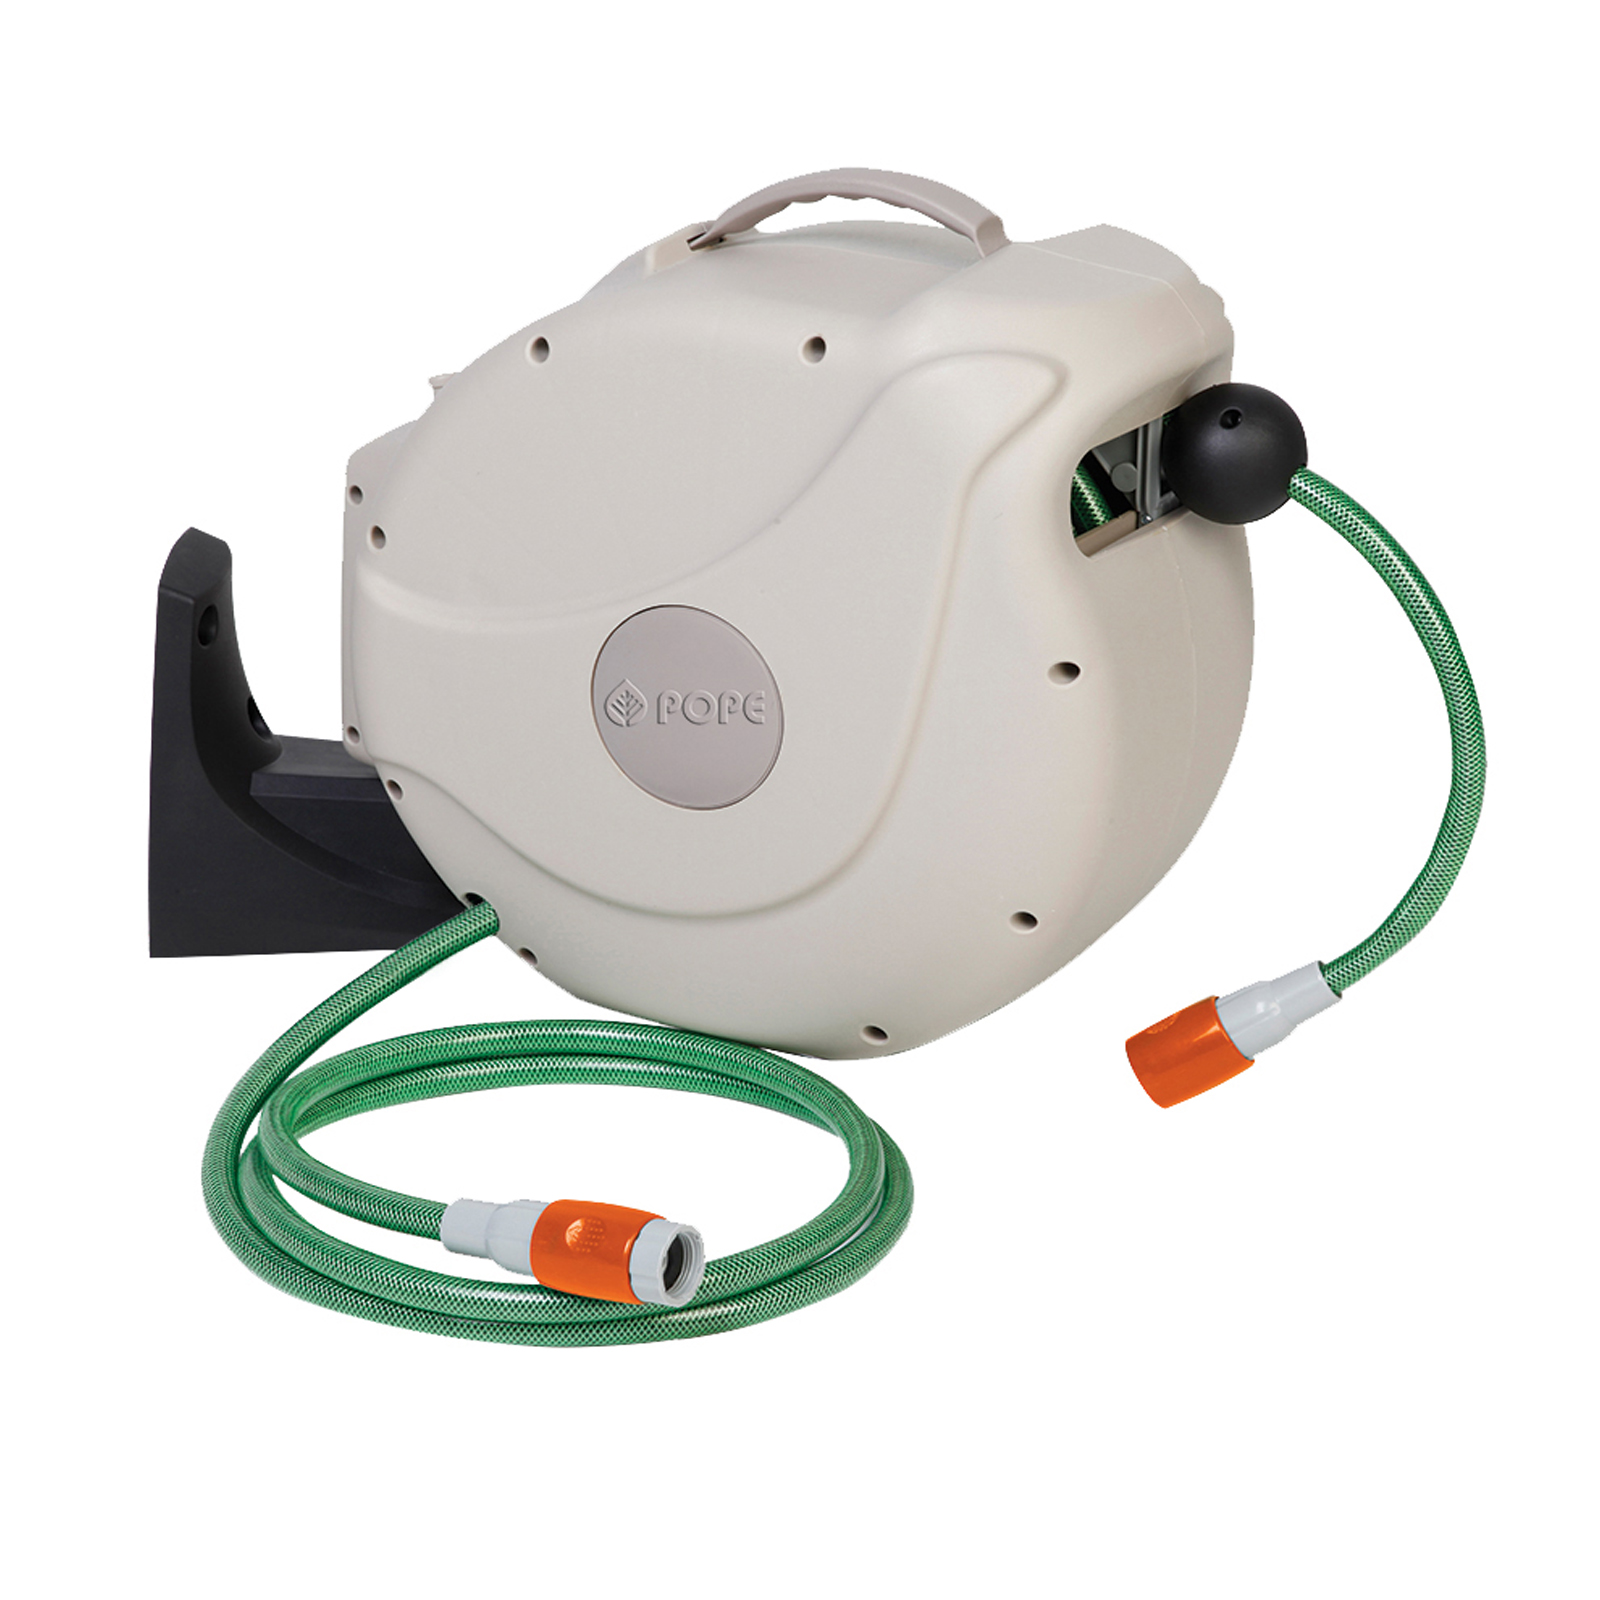 Pope 12mm x 10m Automatic Retractable Hose Reel